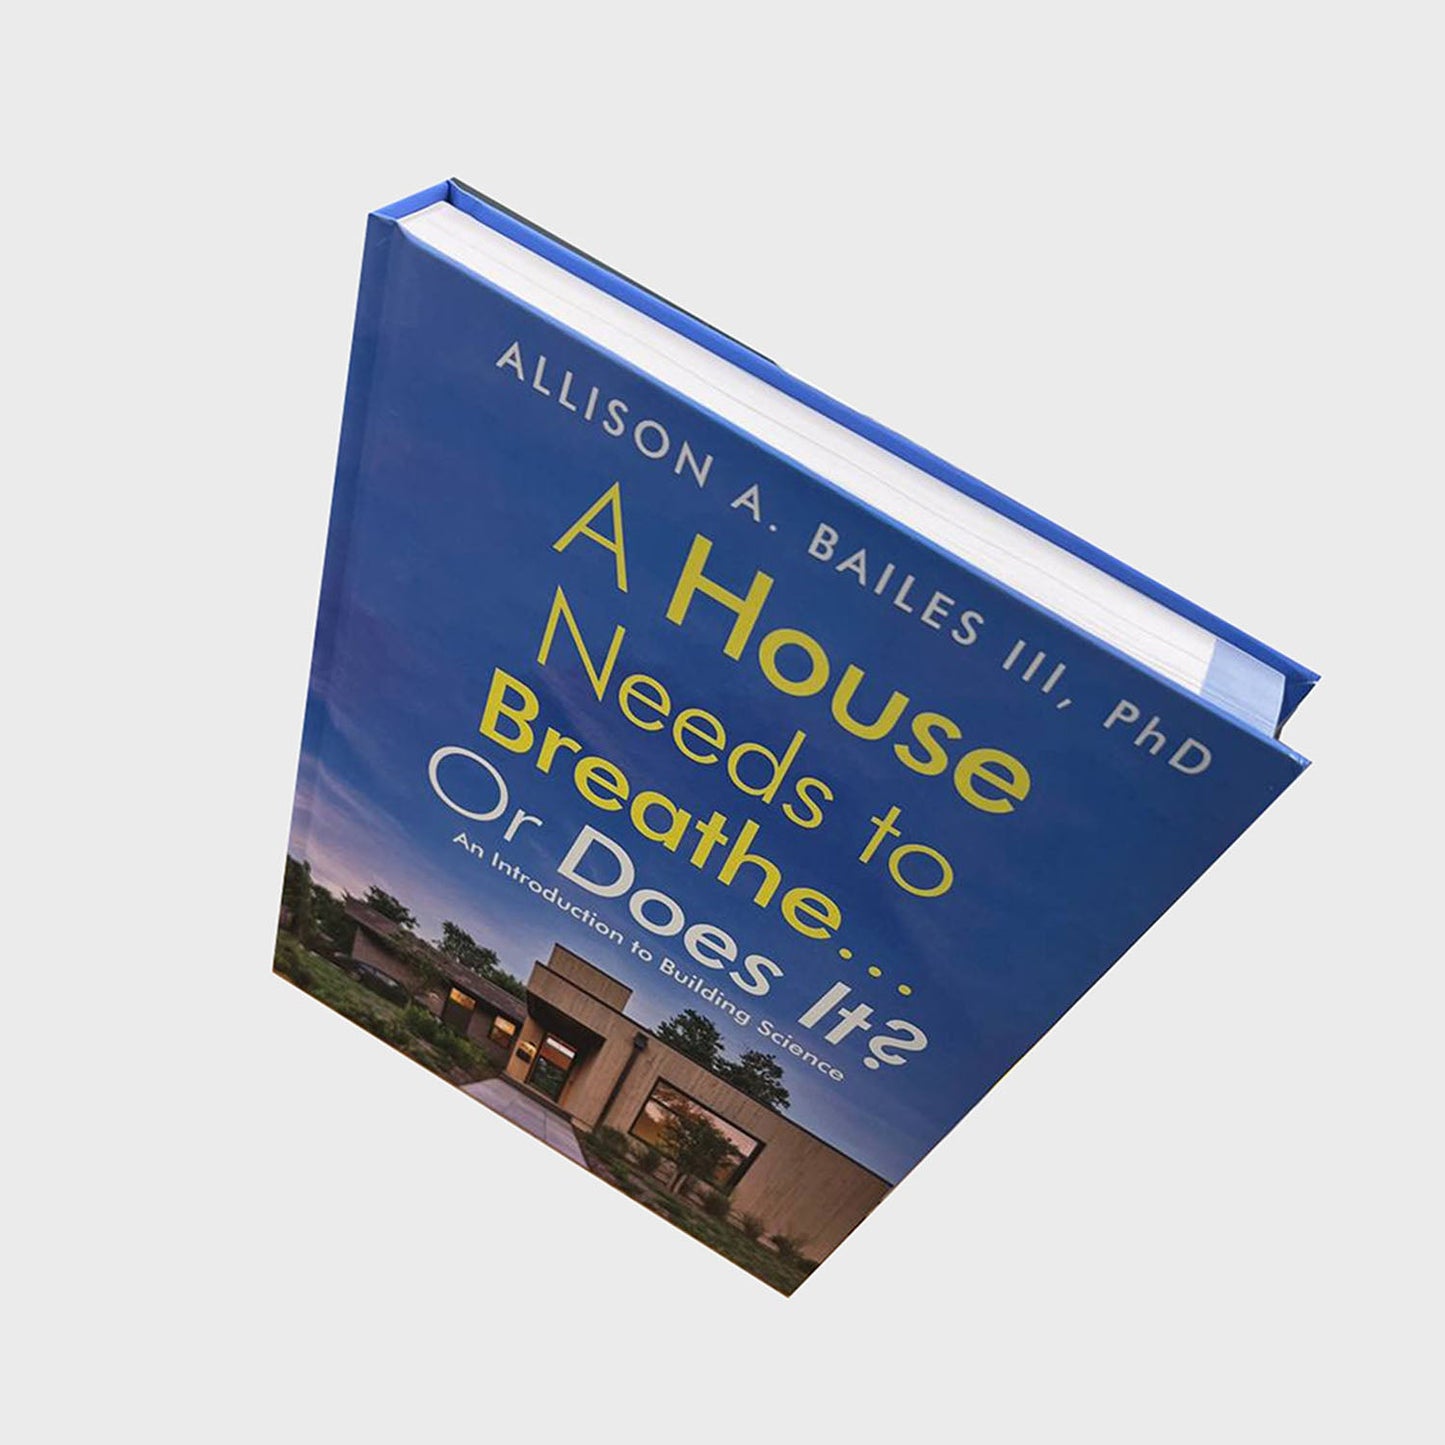 Book "A House Needs to Breathe... Or Does It? An Introduction to Building Science" by Allison A Bailes III - Tight House